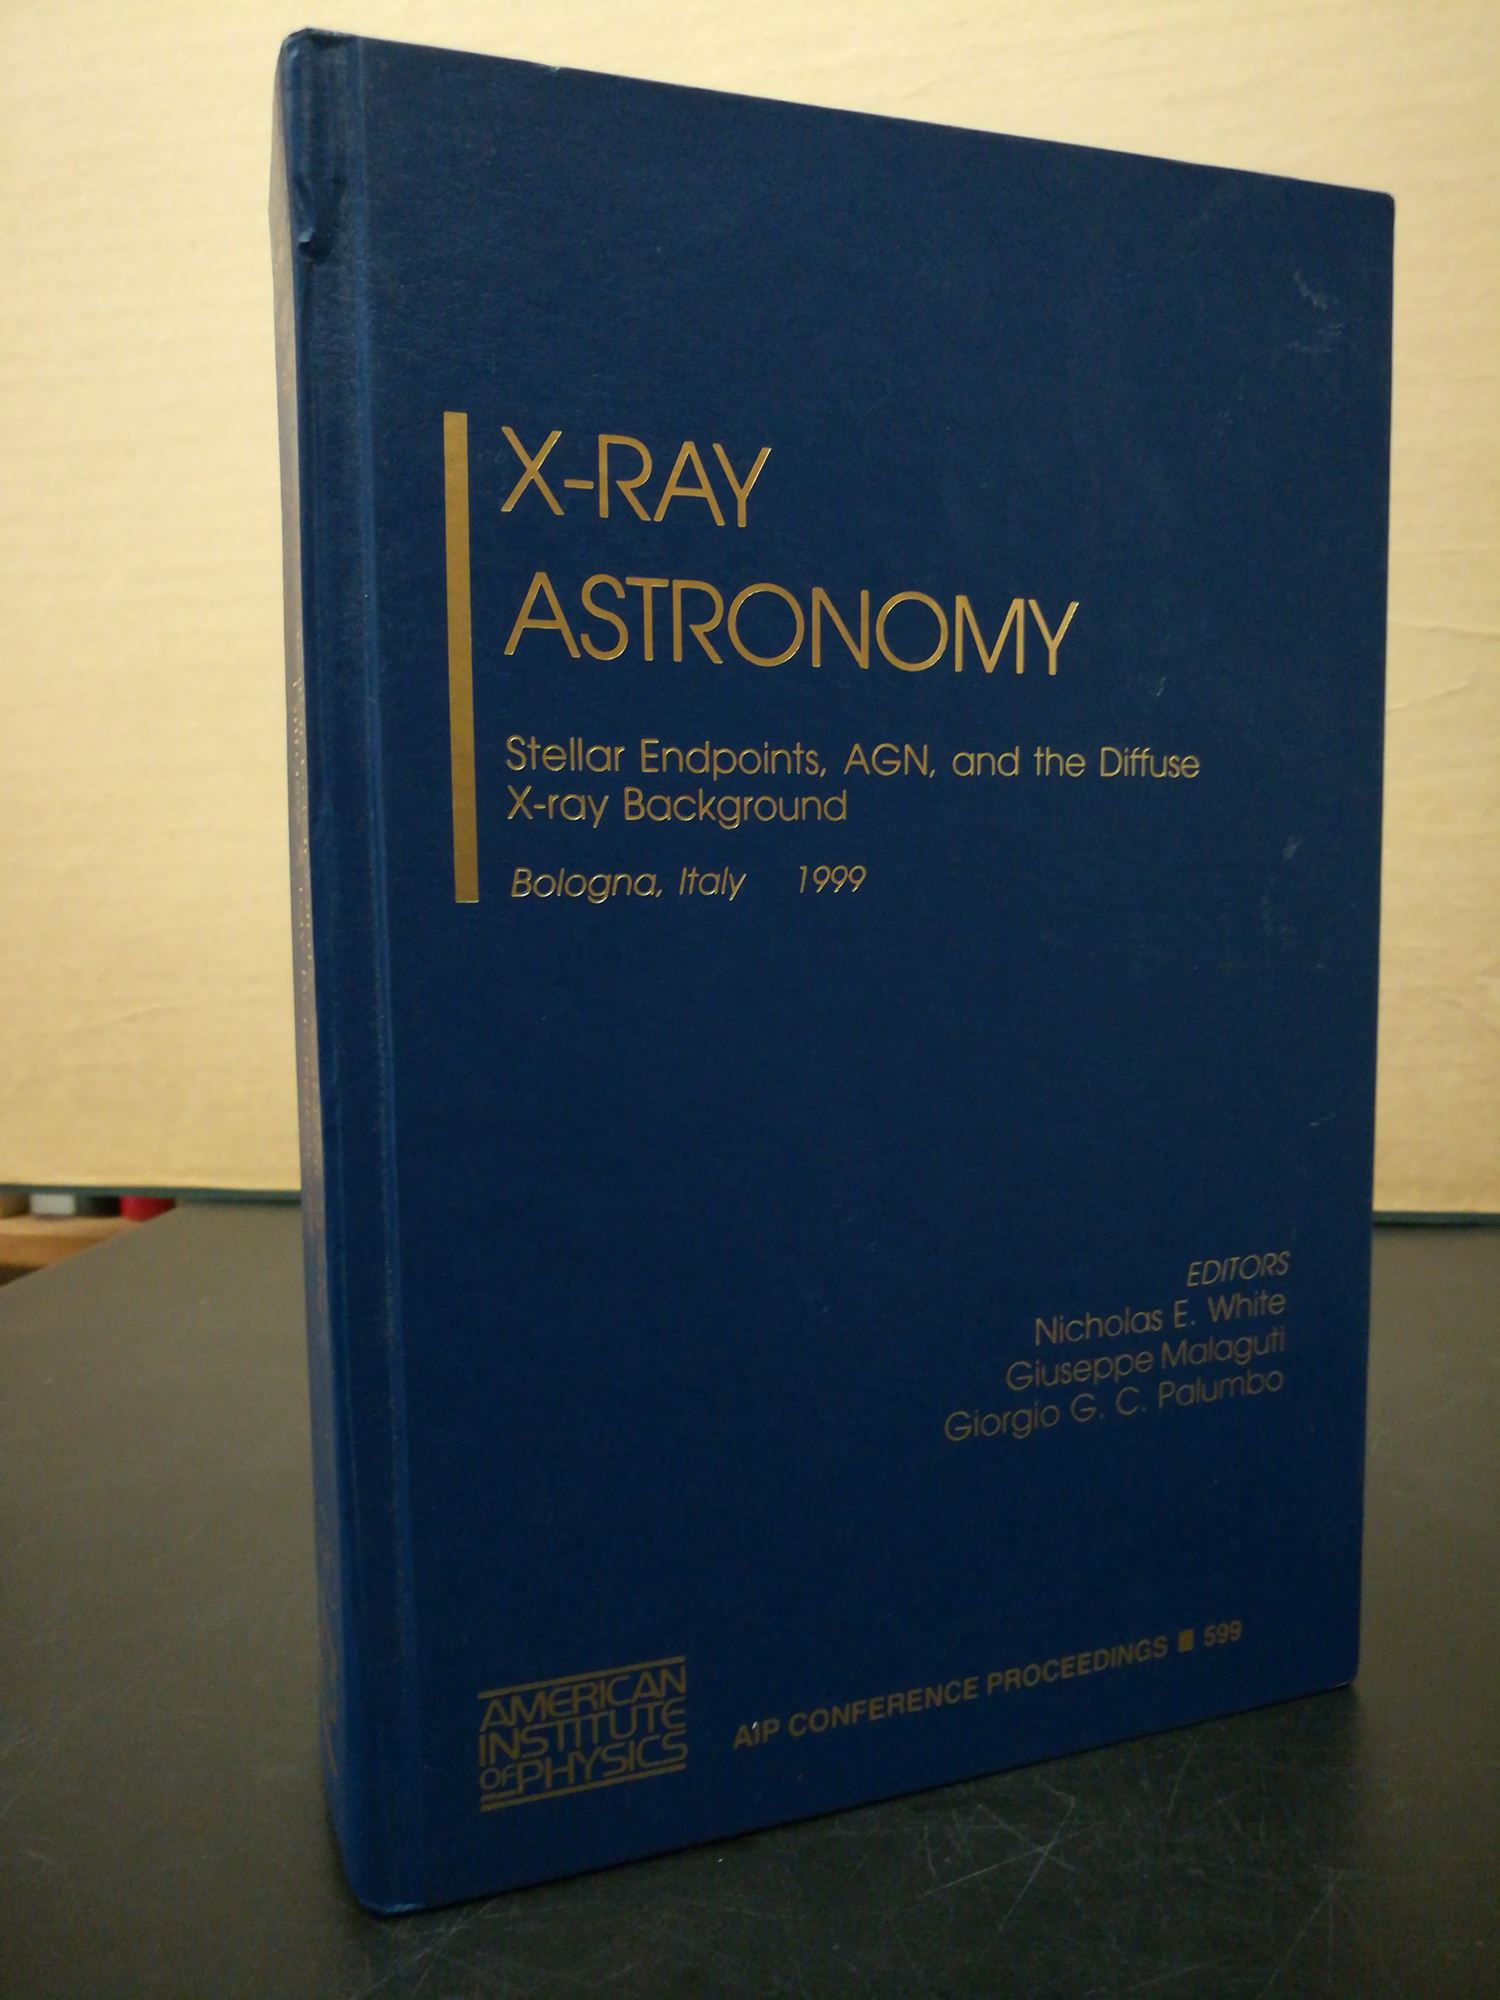 X-Ray Astronomy: Stellar Endpoints, AGN, and the Diffuse X-Ray Background / Bologna, Italy, 6-10 September 1999 (AIP Conference Proceedings) - White, Nicholas E. / Malaguti, Giuseppe / Palumbo, Giorgio G.C. (editors)